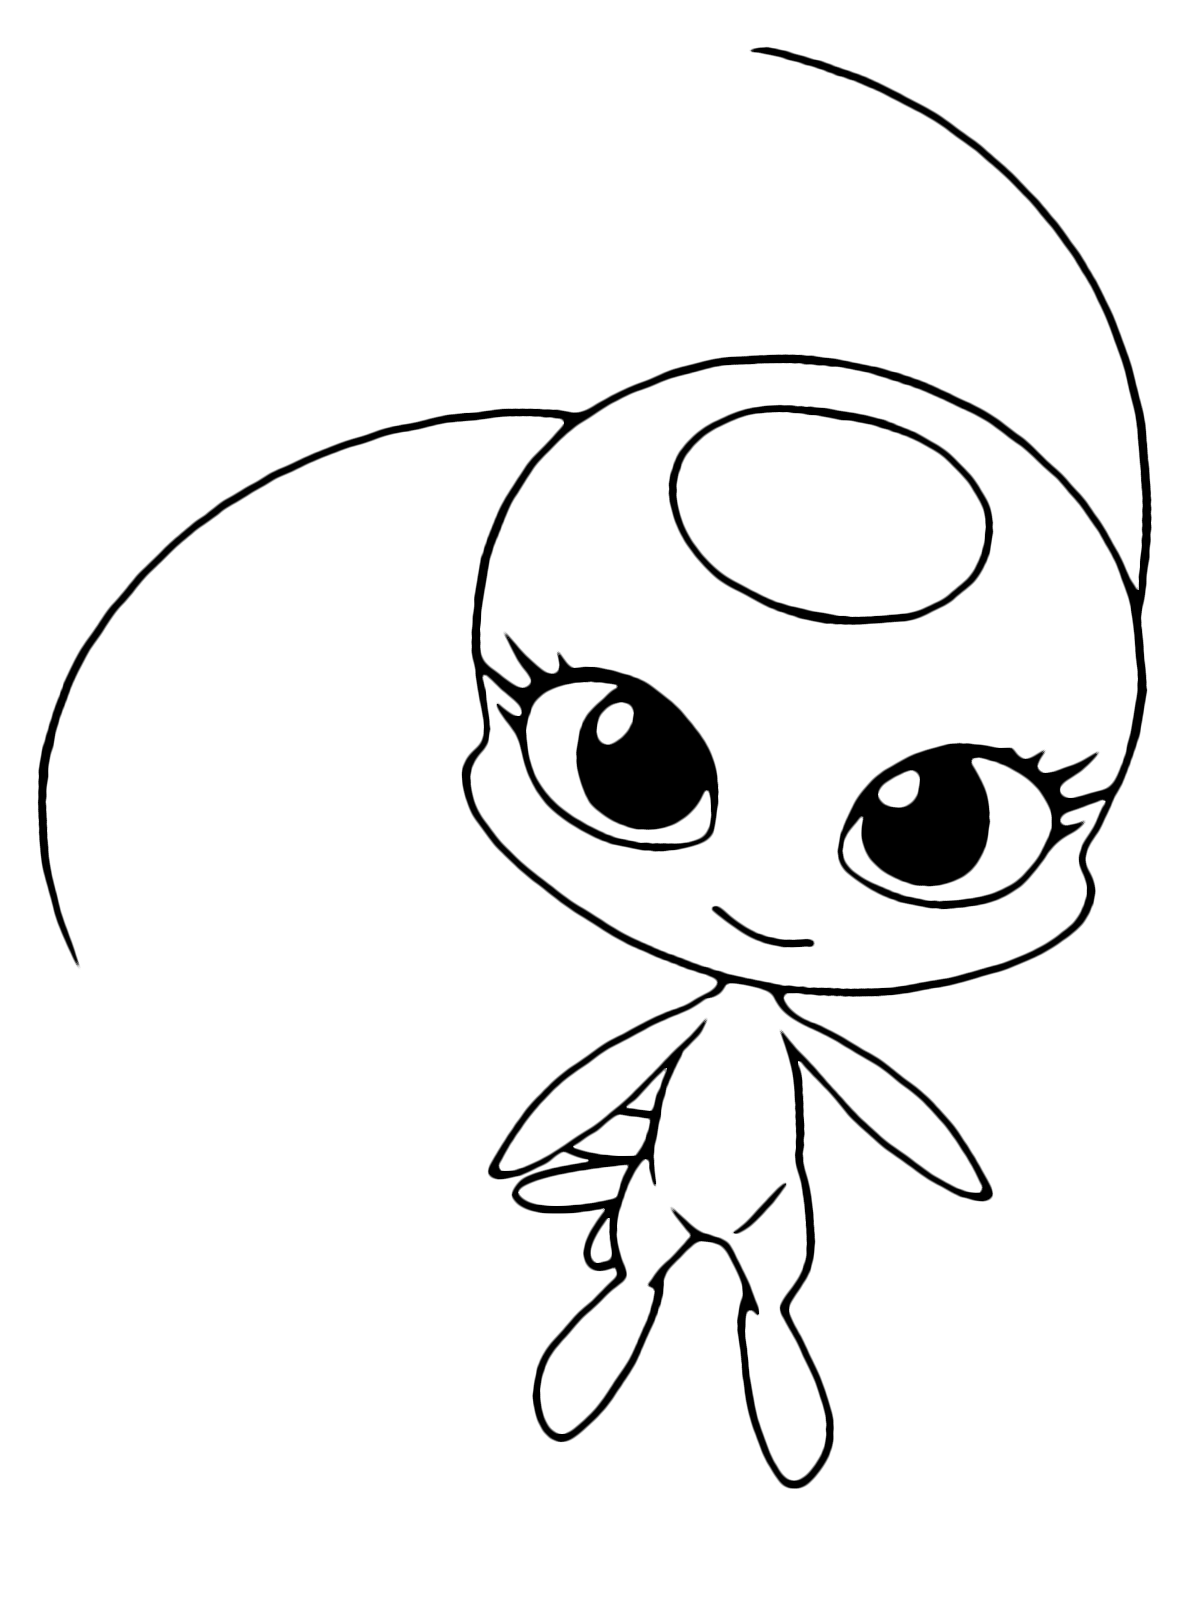 Tikki Miraculous Ladybug Coloring Pages - Coloring Ideas